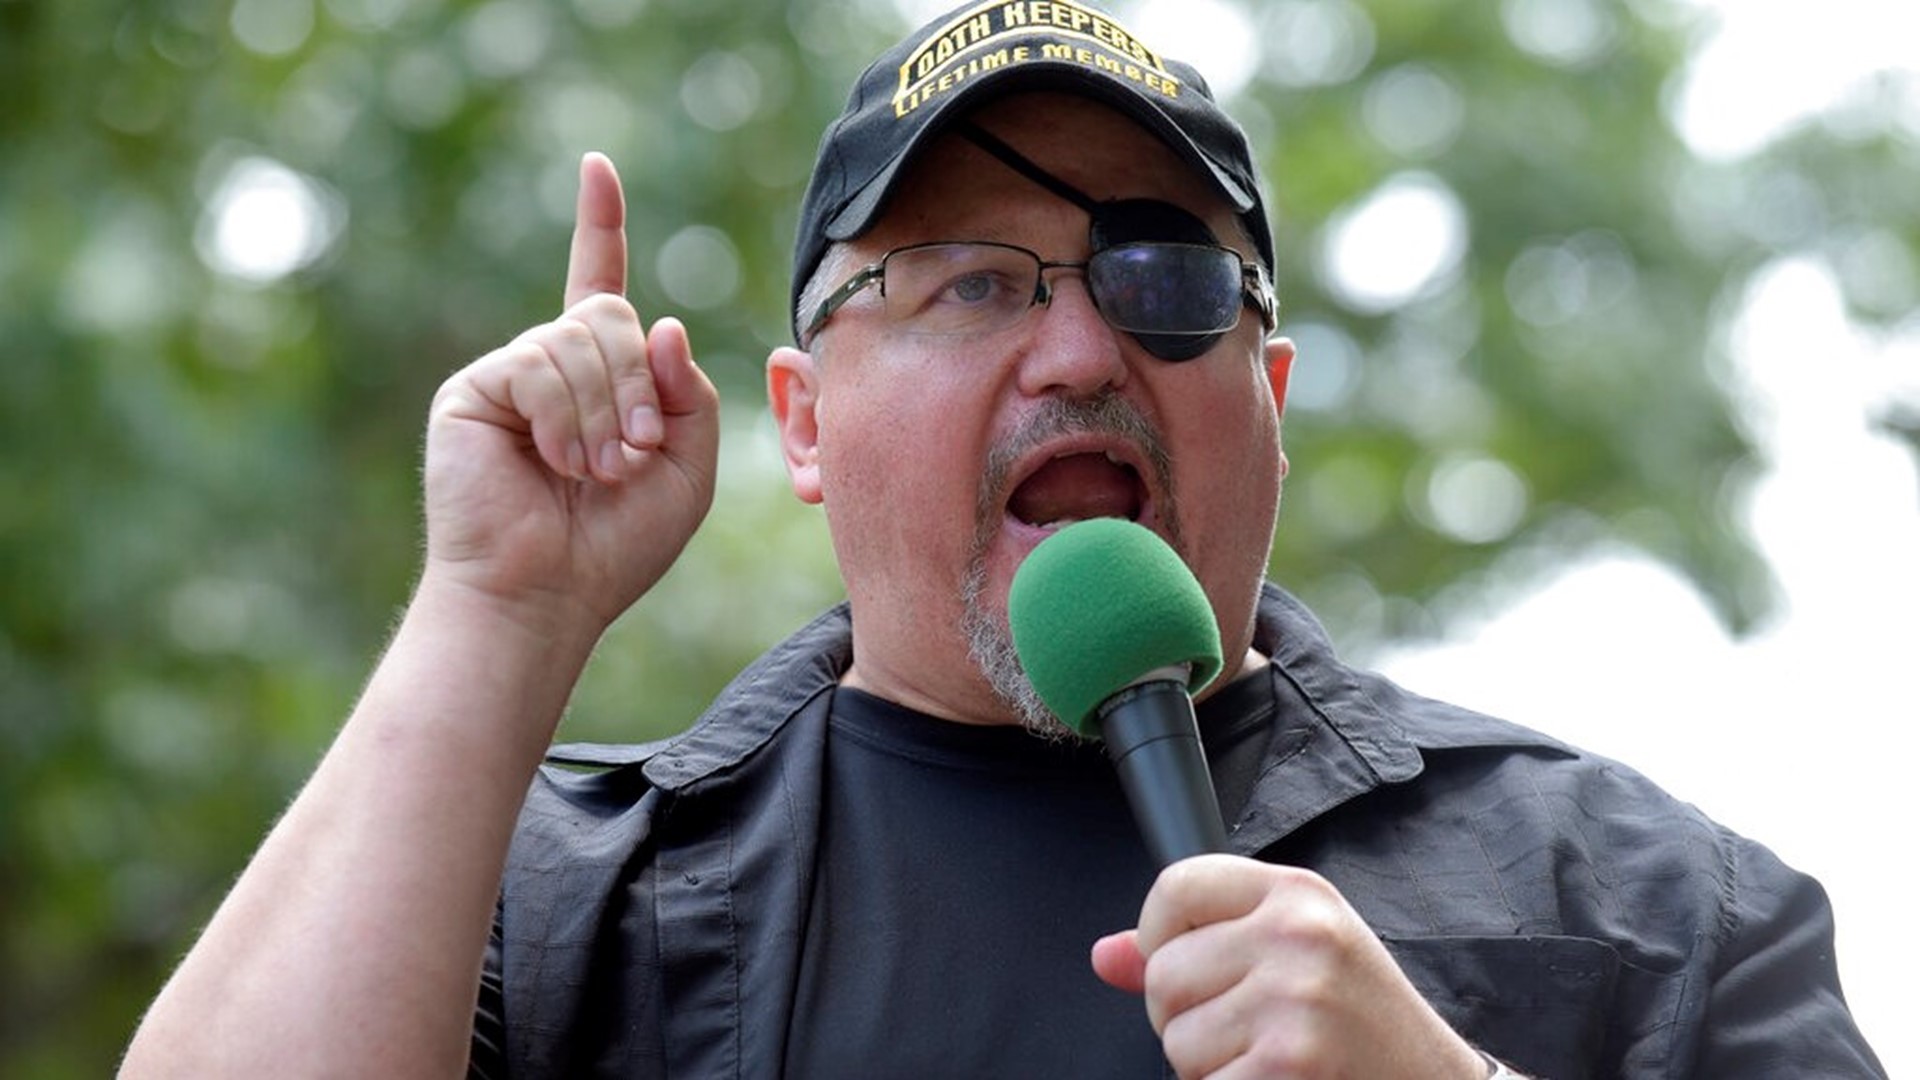 Stewart Rhodes is the founder and leader of the far-right "Oath Keepers" militia group.